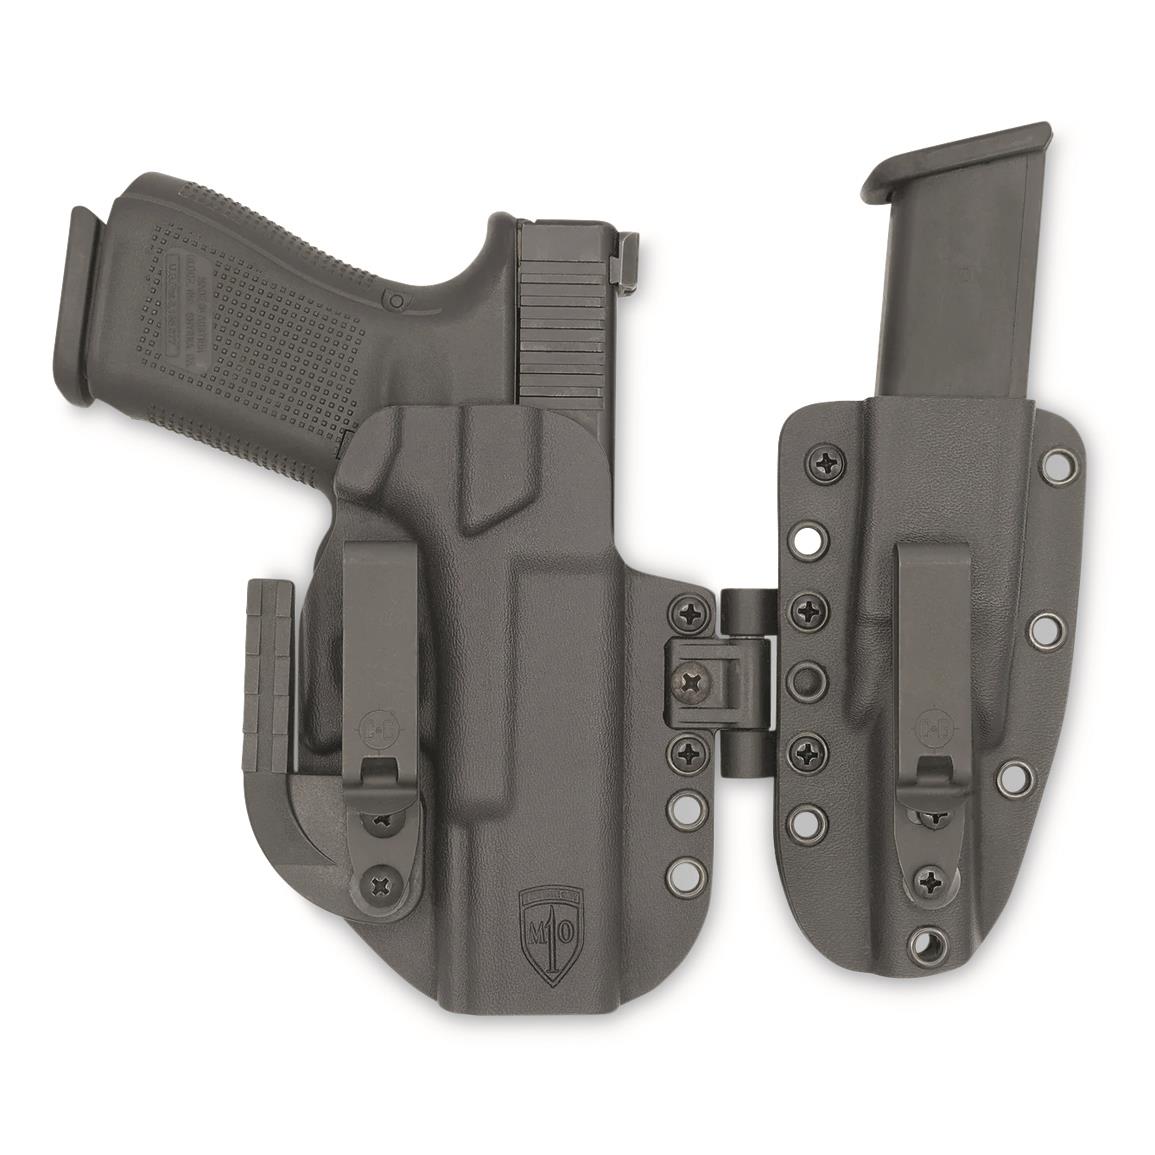 C&G Holsters MOD1-Lima IWB Kydex Holster System, Glock 19/19X/23/44/45 w/Streamlight TLR-7